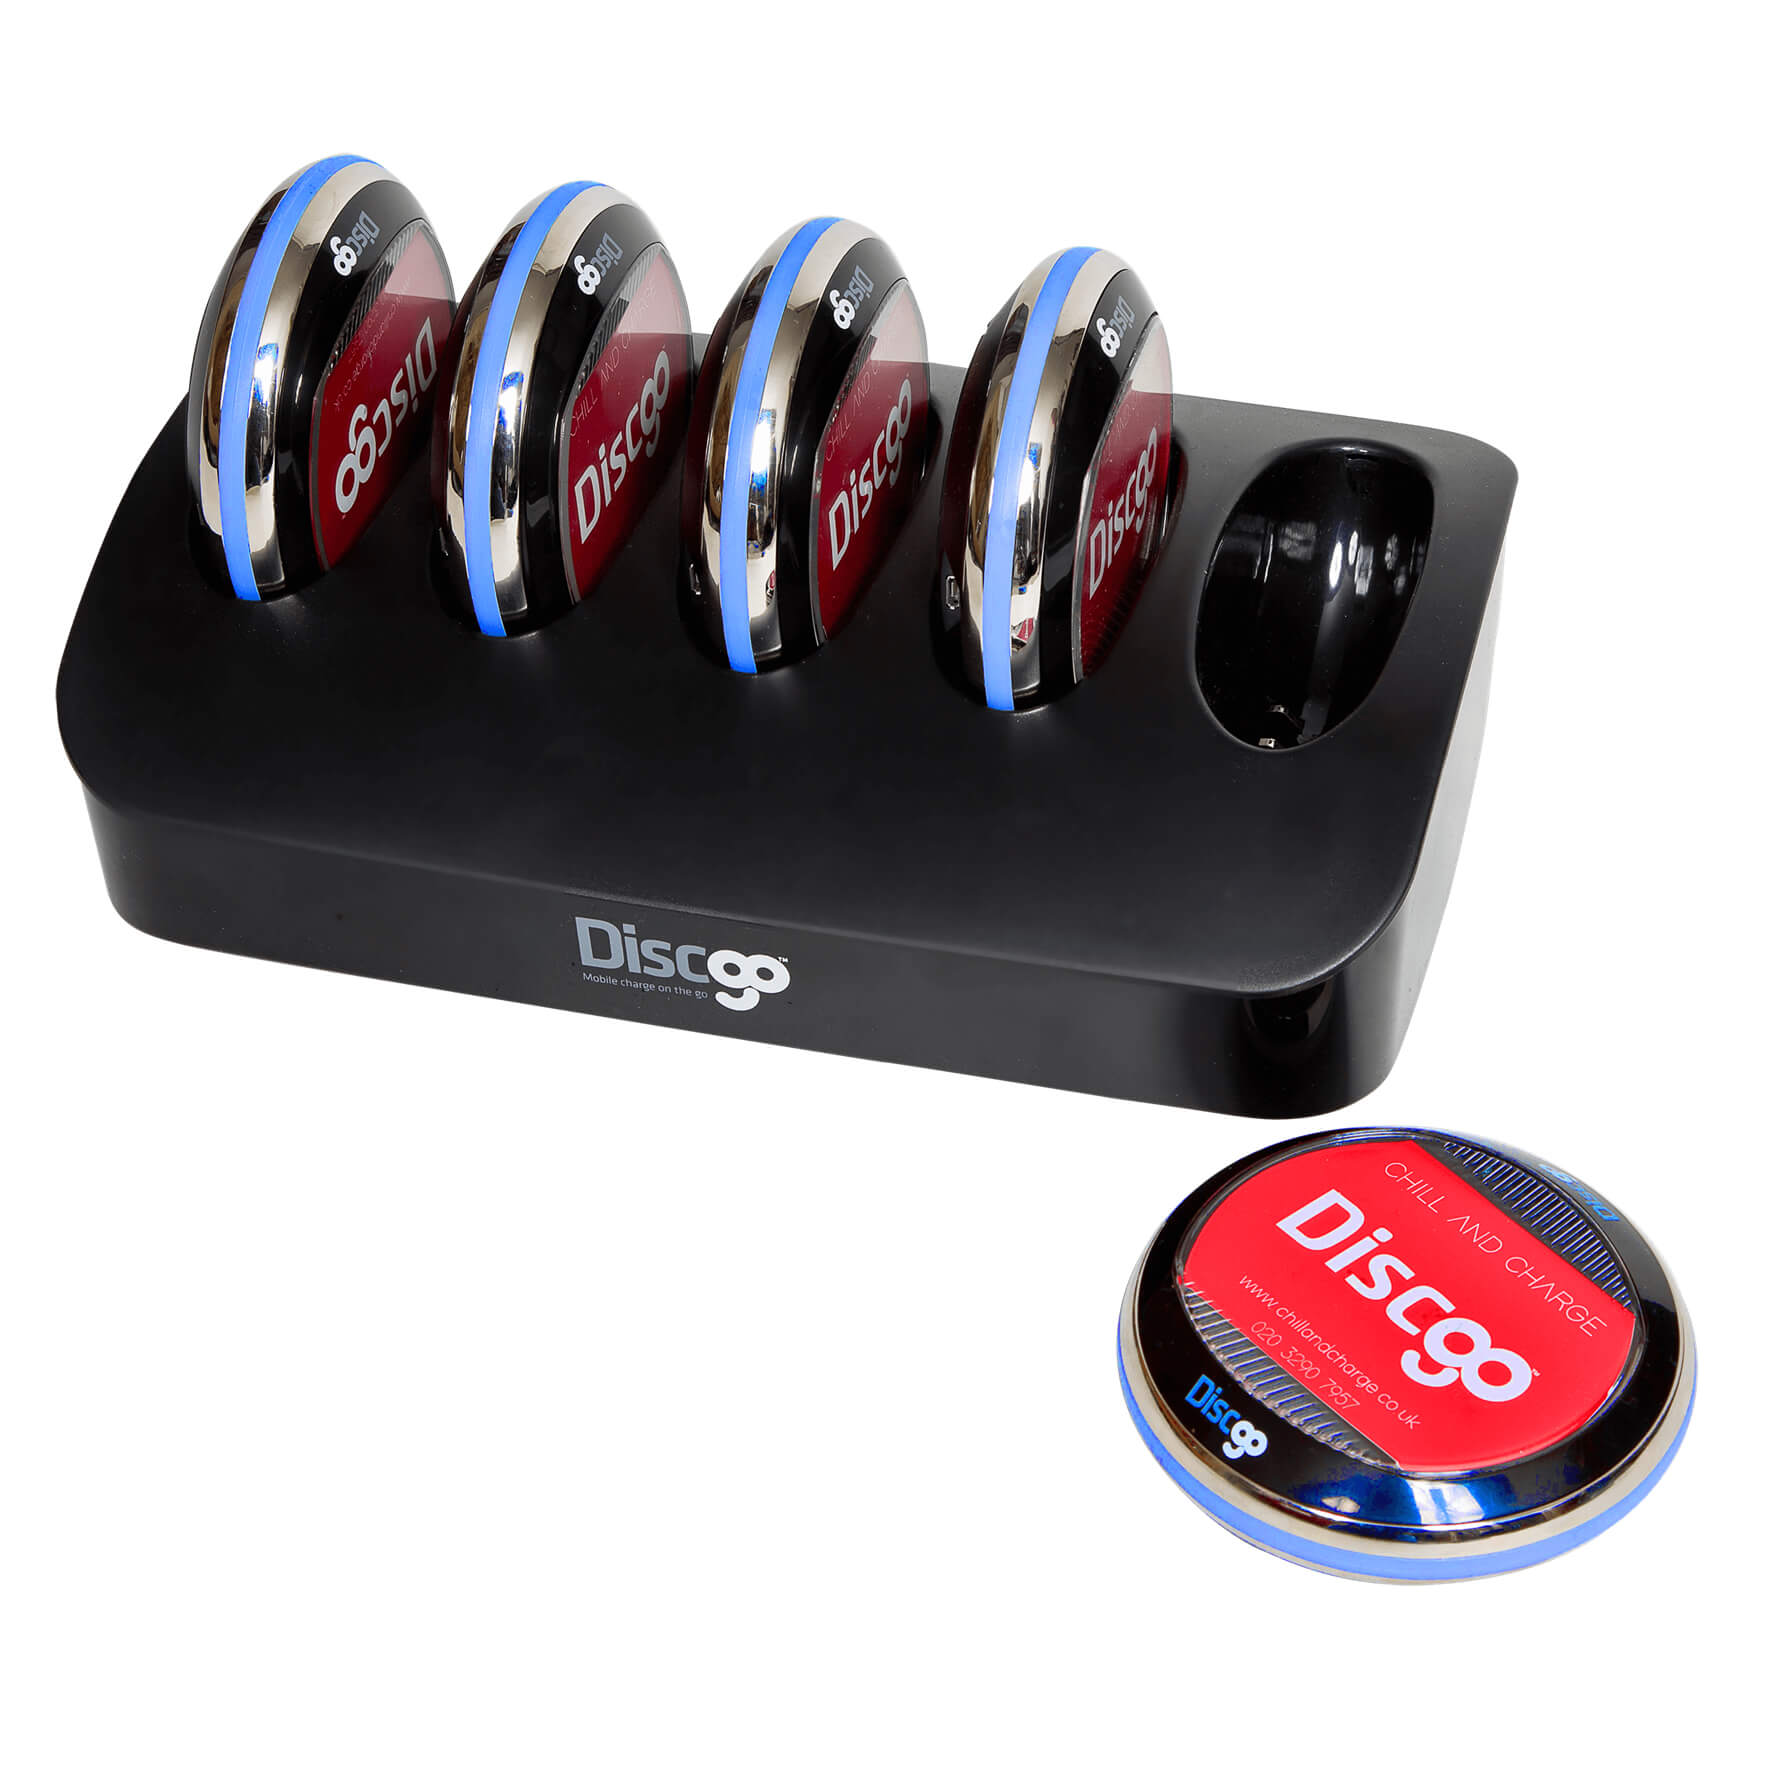 discgo pocket charges for mobile devices